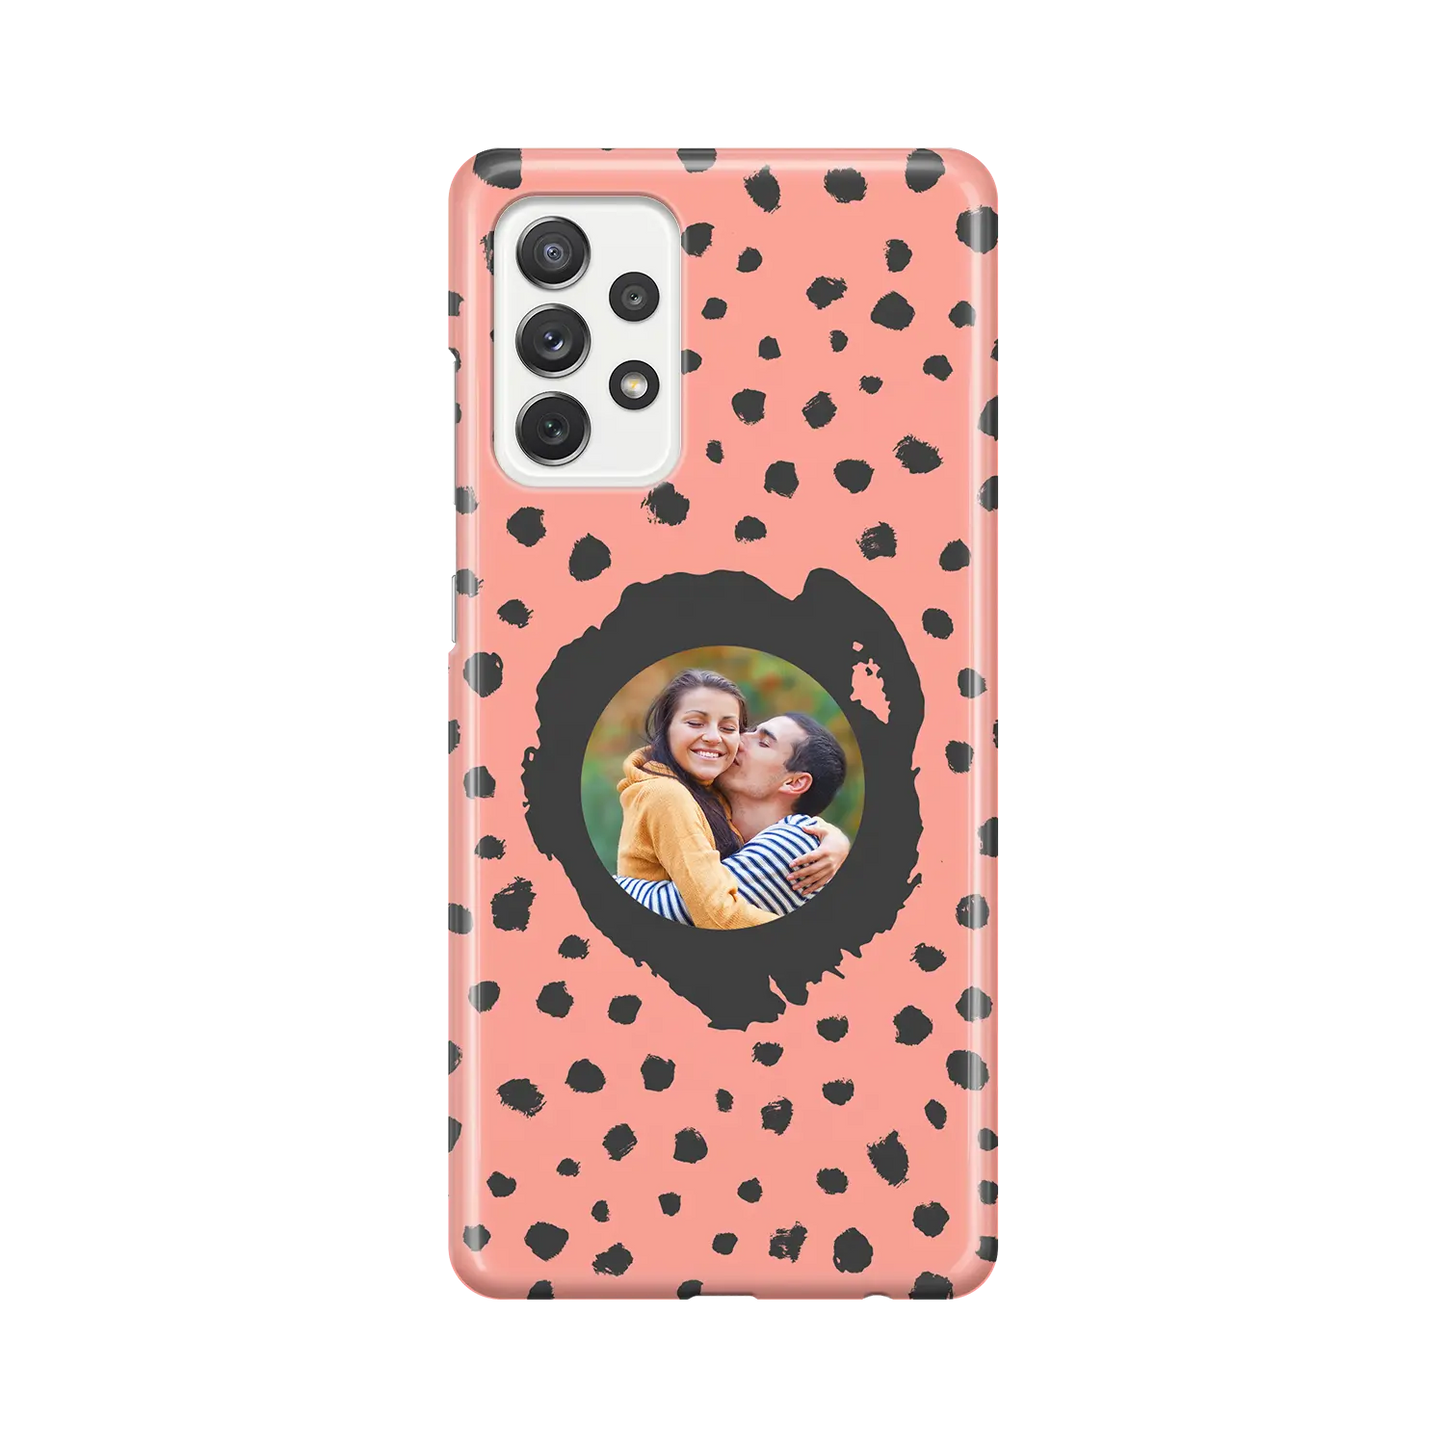 Grunge Dots Picture Style - Custom Galaxy A Case